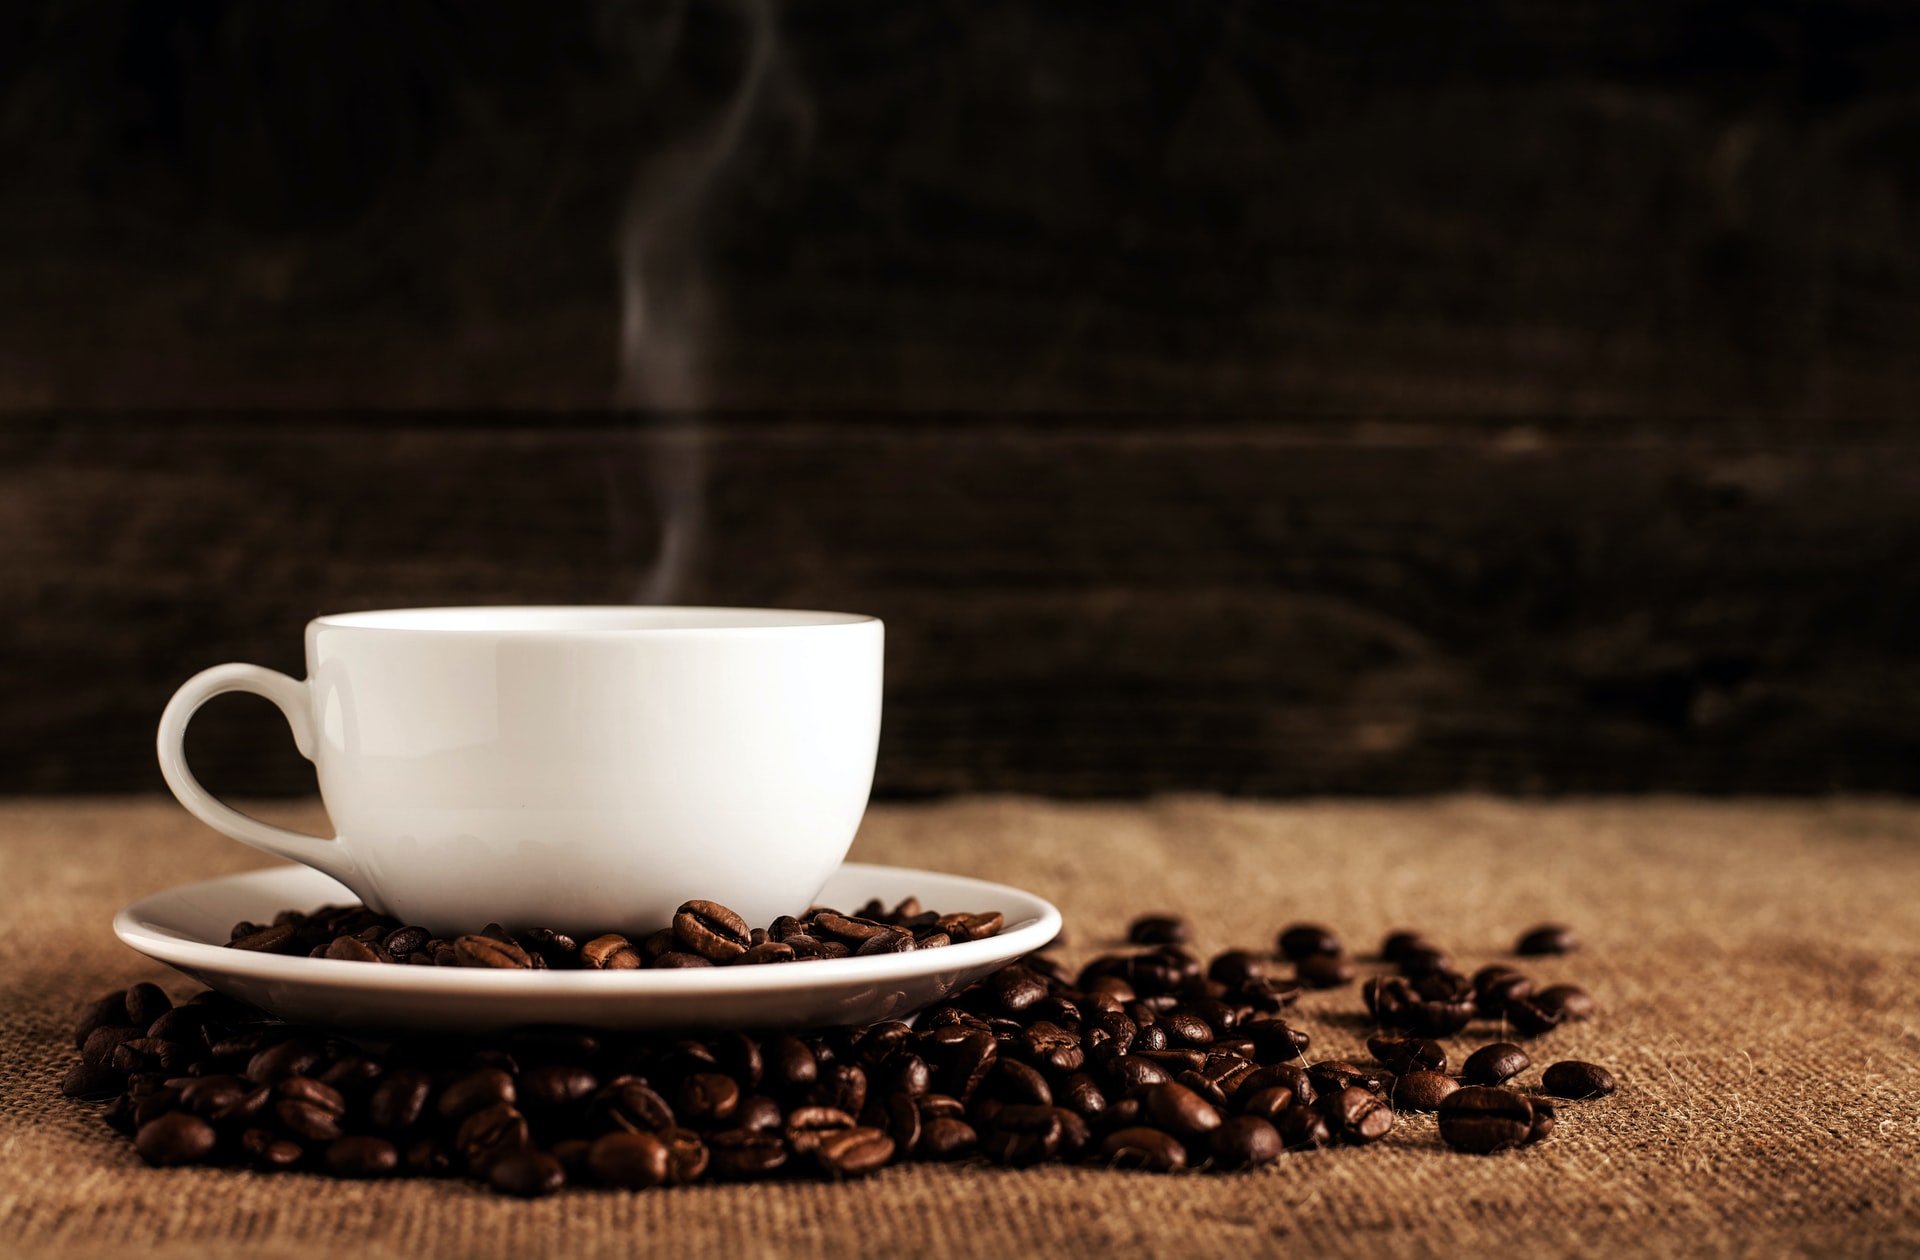 Geek insider, geekinsider, geekinsider. Com,, should you limit your caffeine intake? , living